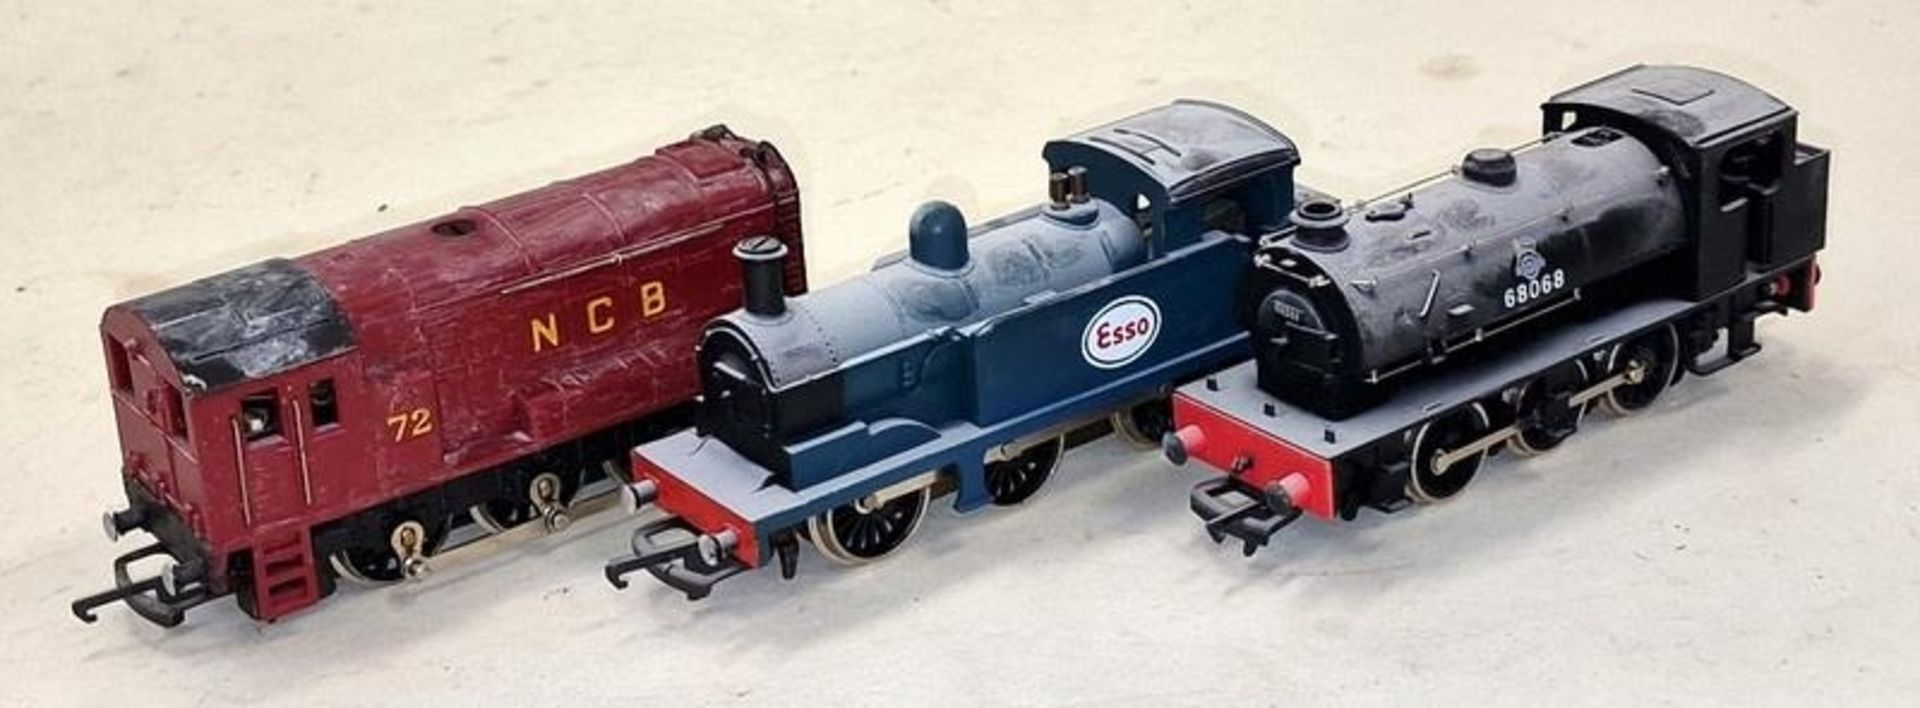 Three OO Guage to include, British Railways 68068, Esso 38 and NCB 72 - previously displayed so